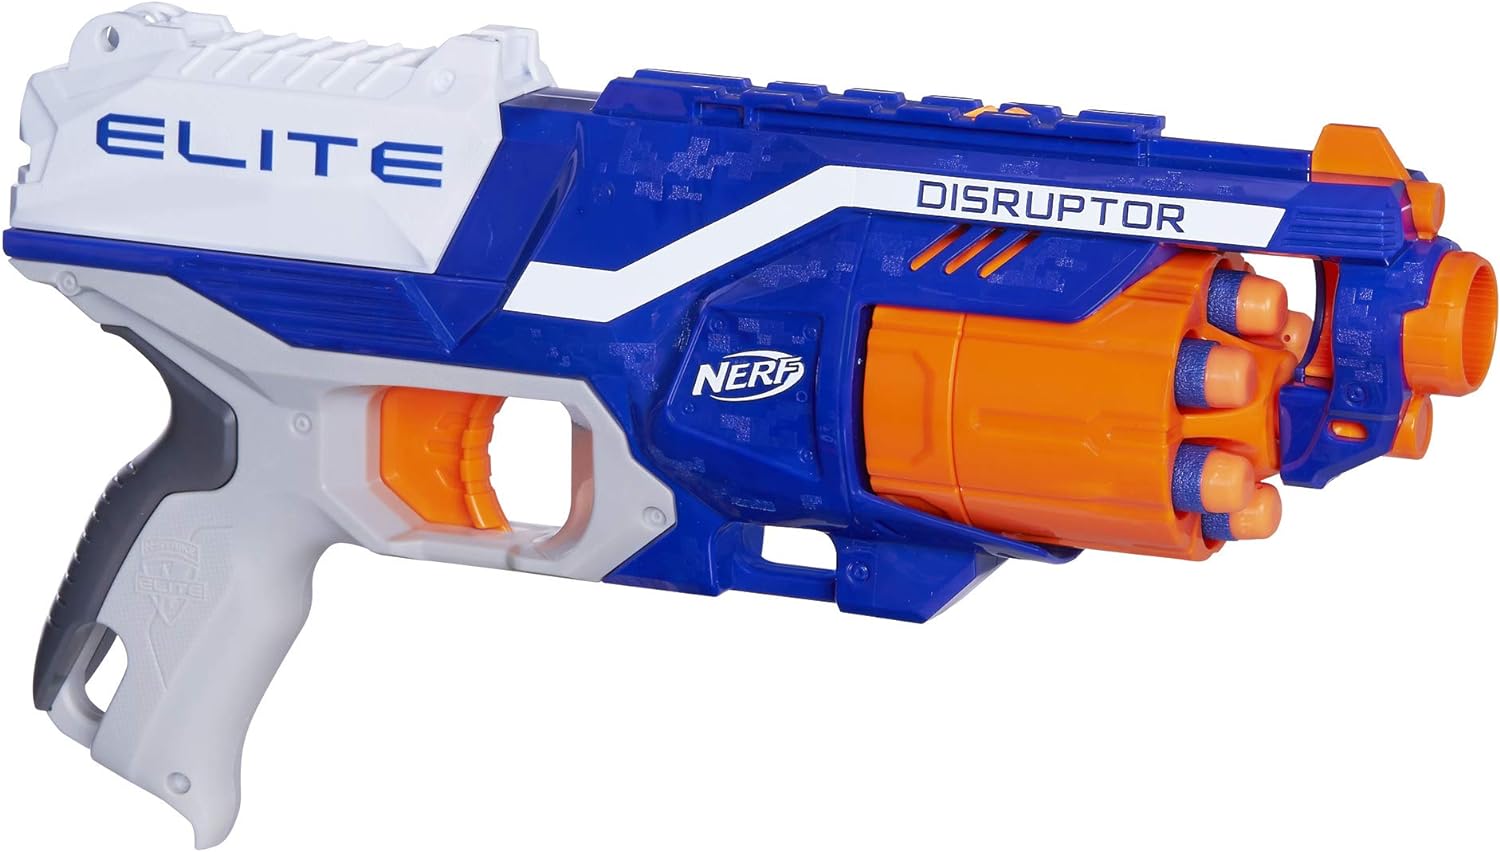 Nerf Disruptor Elite Blaster - 6-Dart Rotating Drum, Slam Fire, Includes 6 Official Nerf Elite Darts - for Kids, Teens, Adults (Amazon Exclusive)